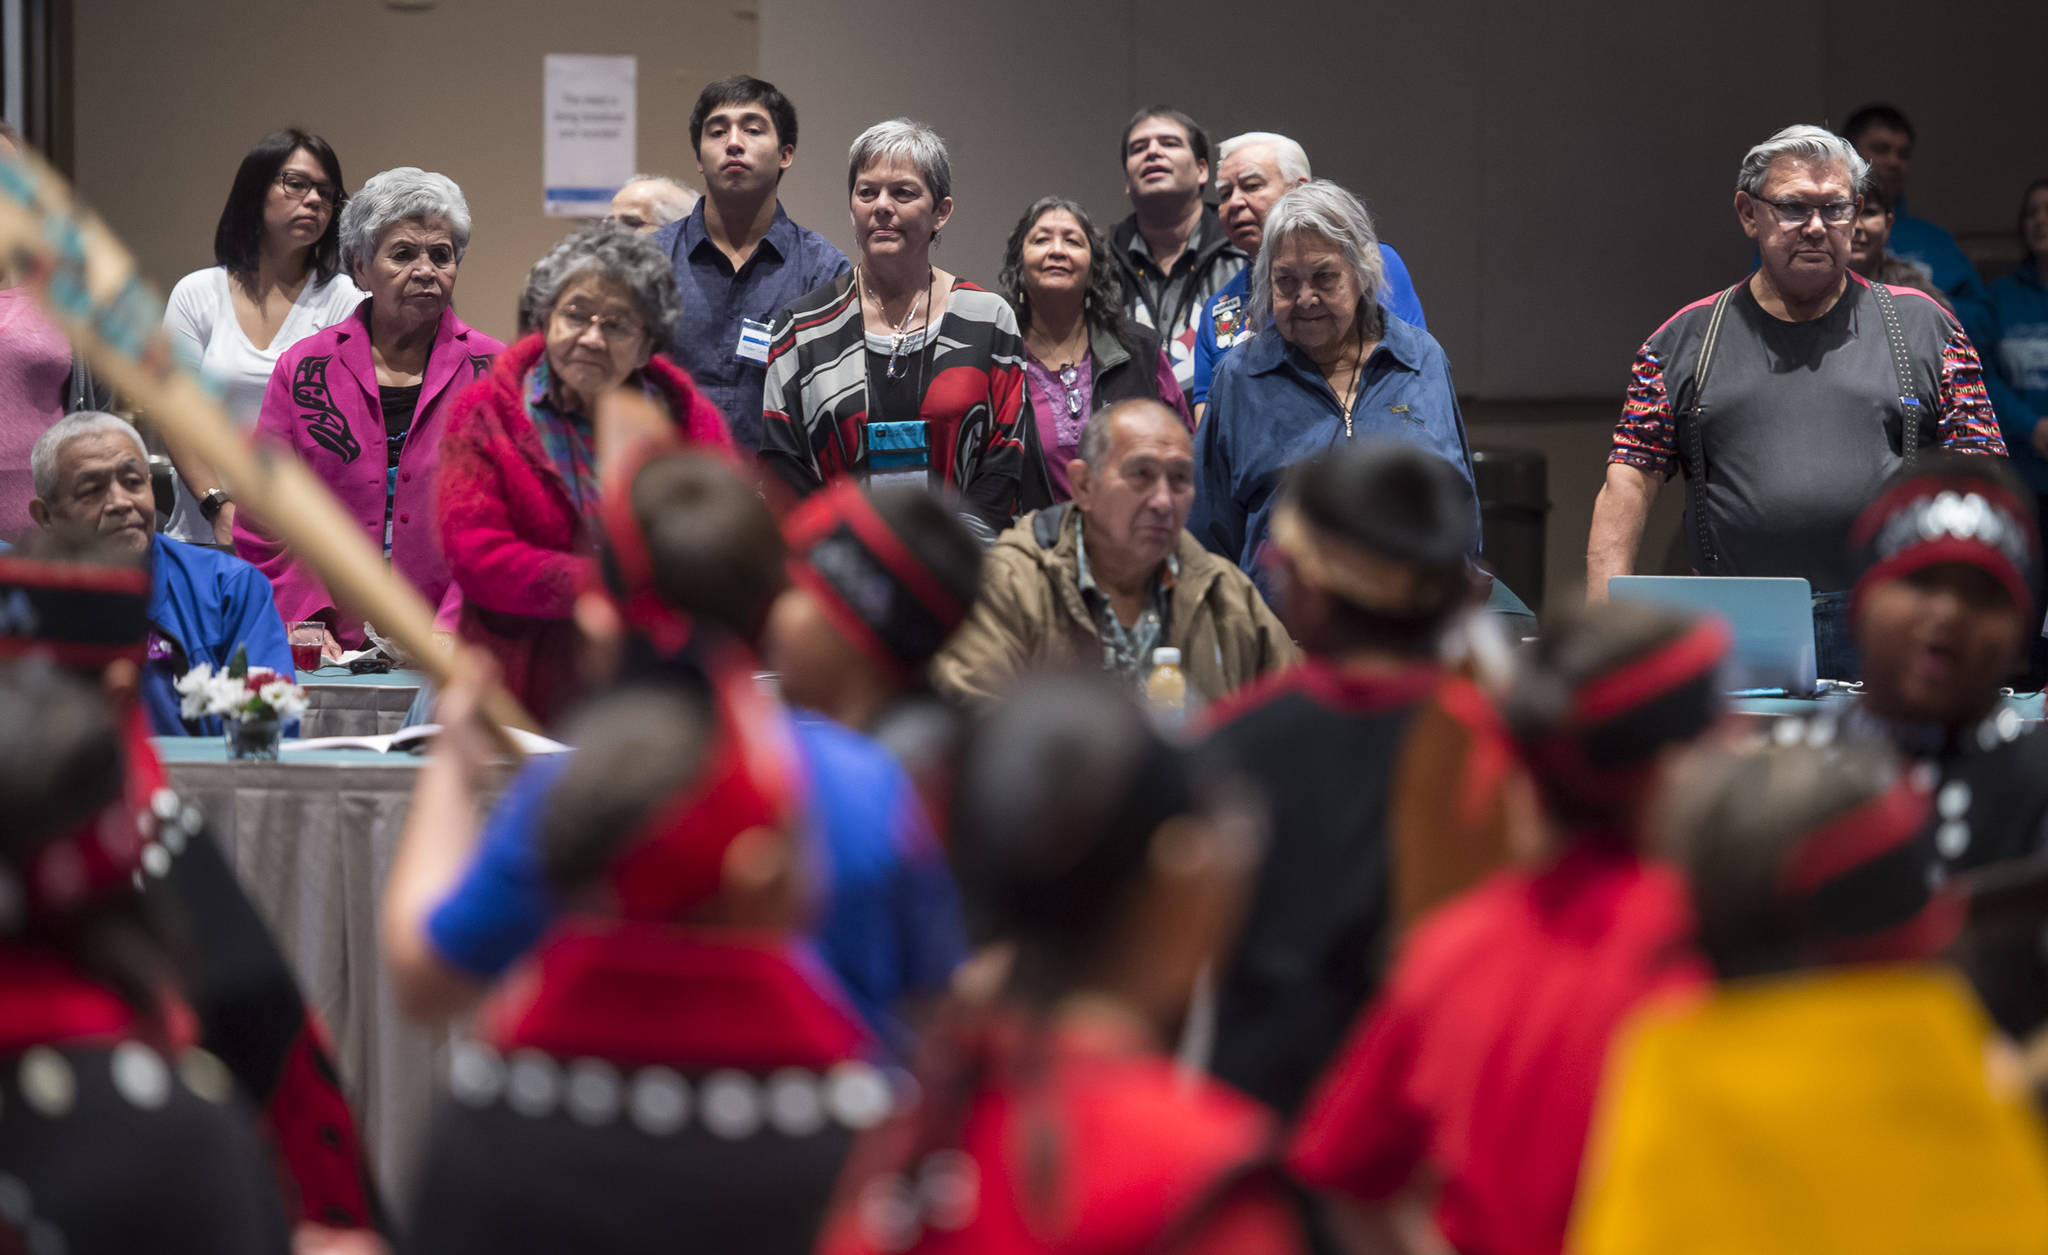 Native speakers stand to watch the Tlingit Culture Language and Literacy Dance Group from Harborview Elementary School dance during the Voices of Our Ancestors Language Summit at Centennial Hall on Tuesday, Nov. 13, 2018. (Michael Penn | Juneau Empire)